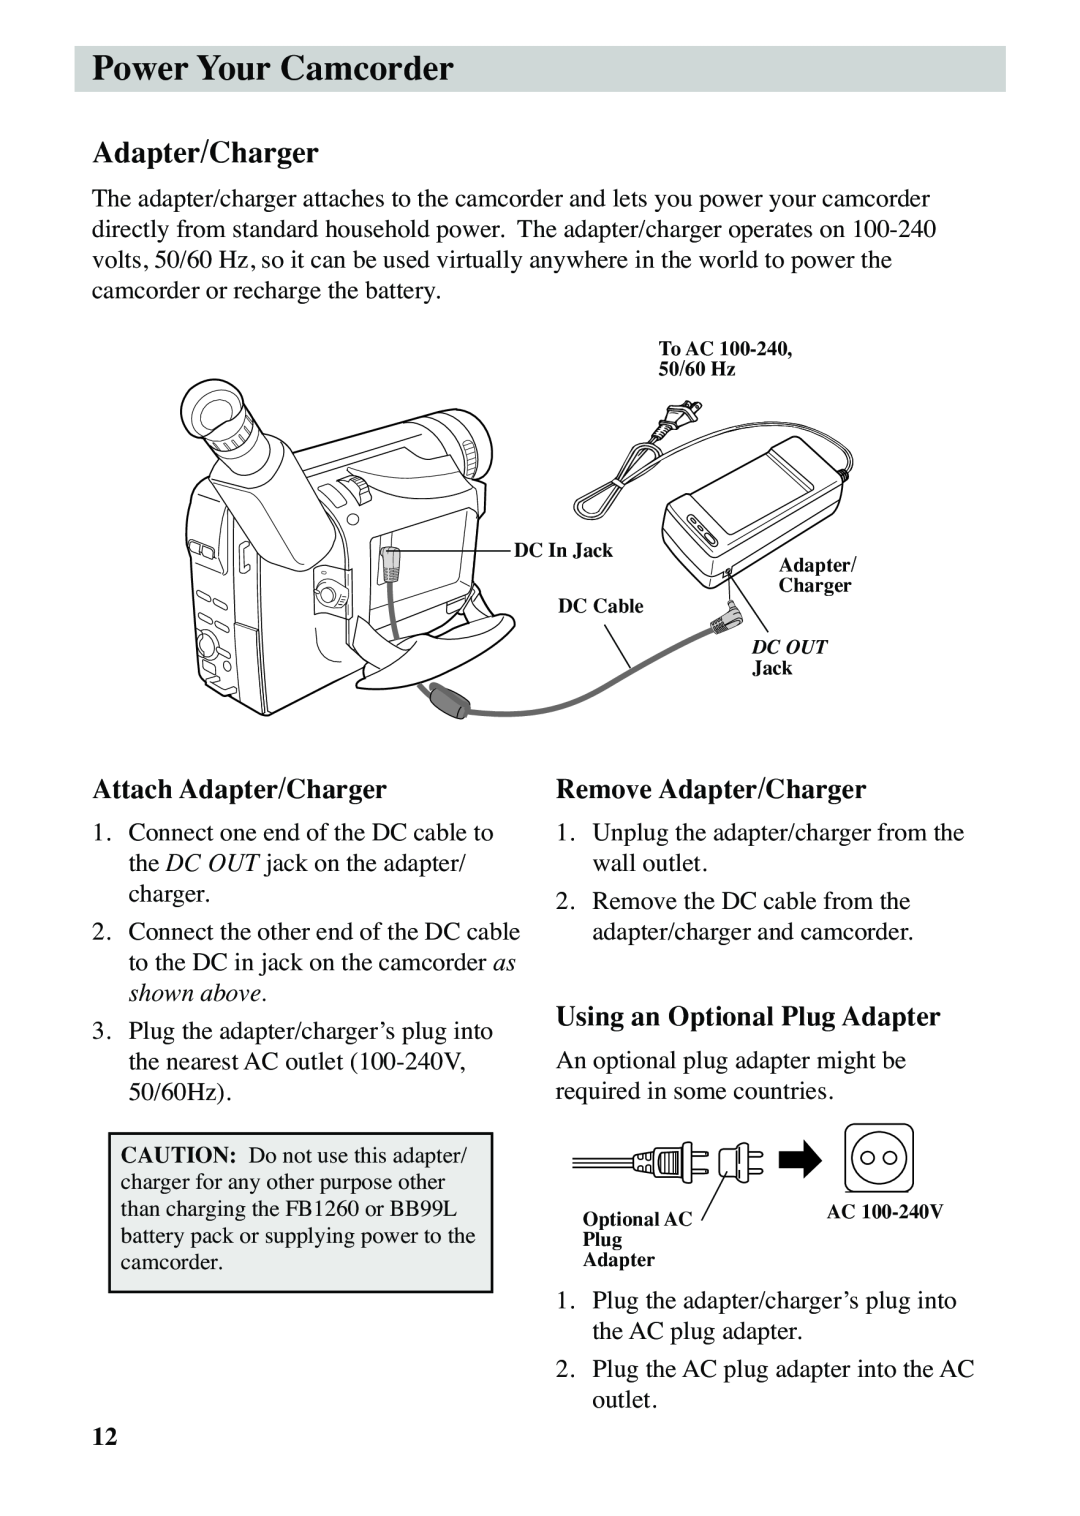 RCA CC6263 manual Power Your Camcorder, Attach Adapter/Charger, Remove Adapter/Charger, Using an Optional Plug Adapter 